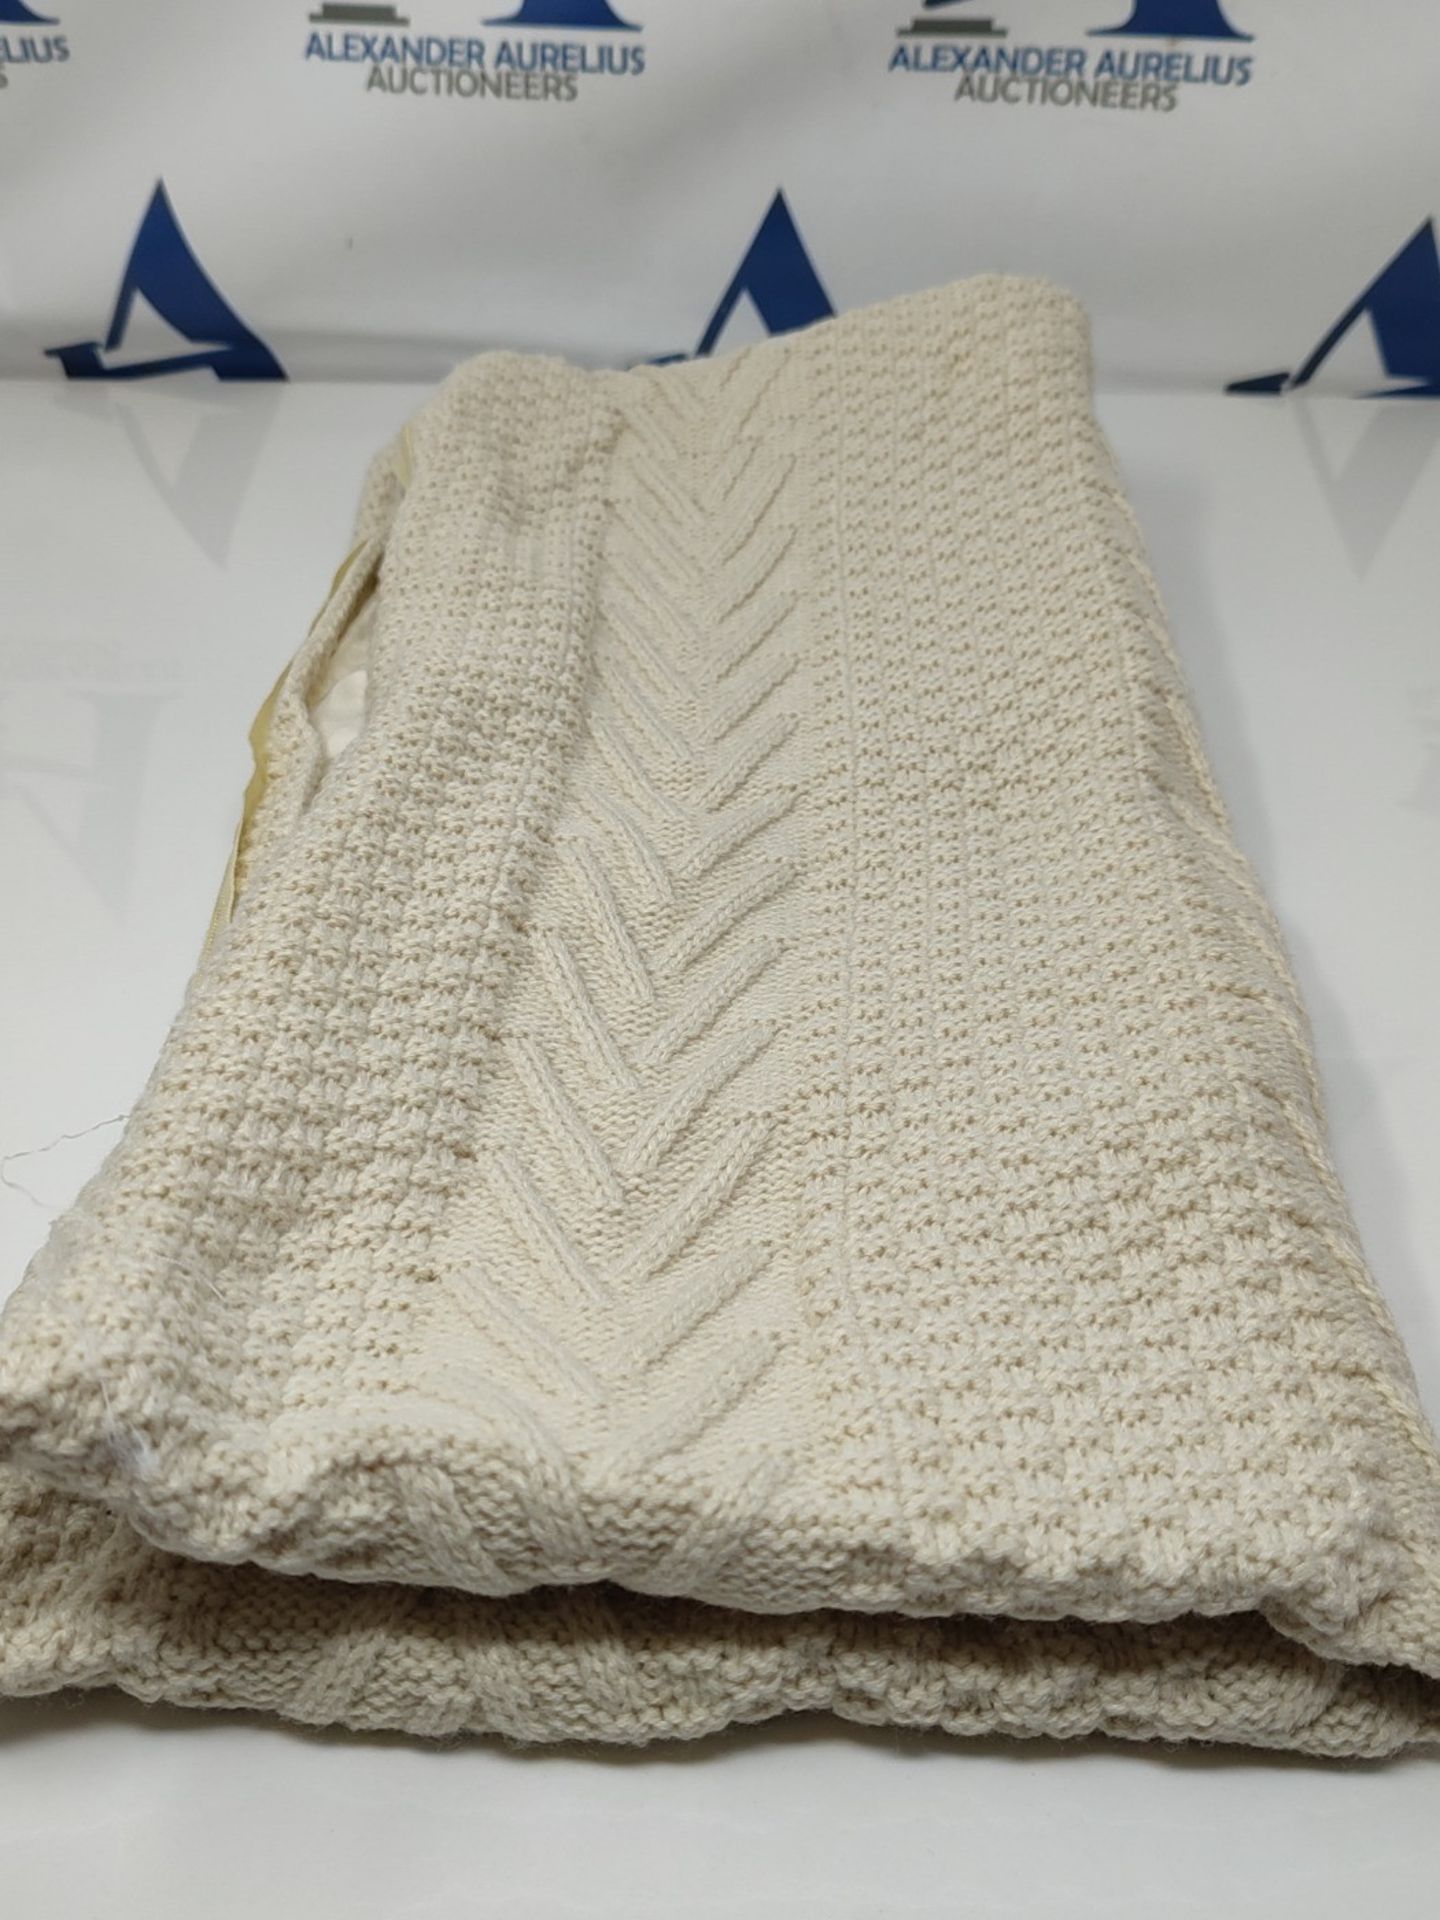 Mandioo Cotton Knitted Decorative Square Beige Cushion Covers 45cm x 45cm 18x18 Inch S - Image 2 of 2